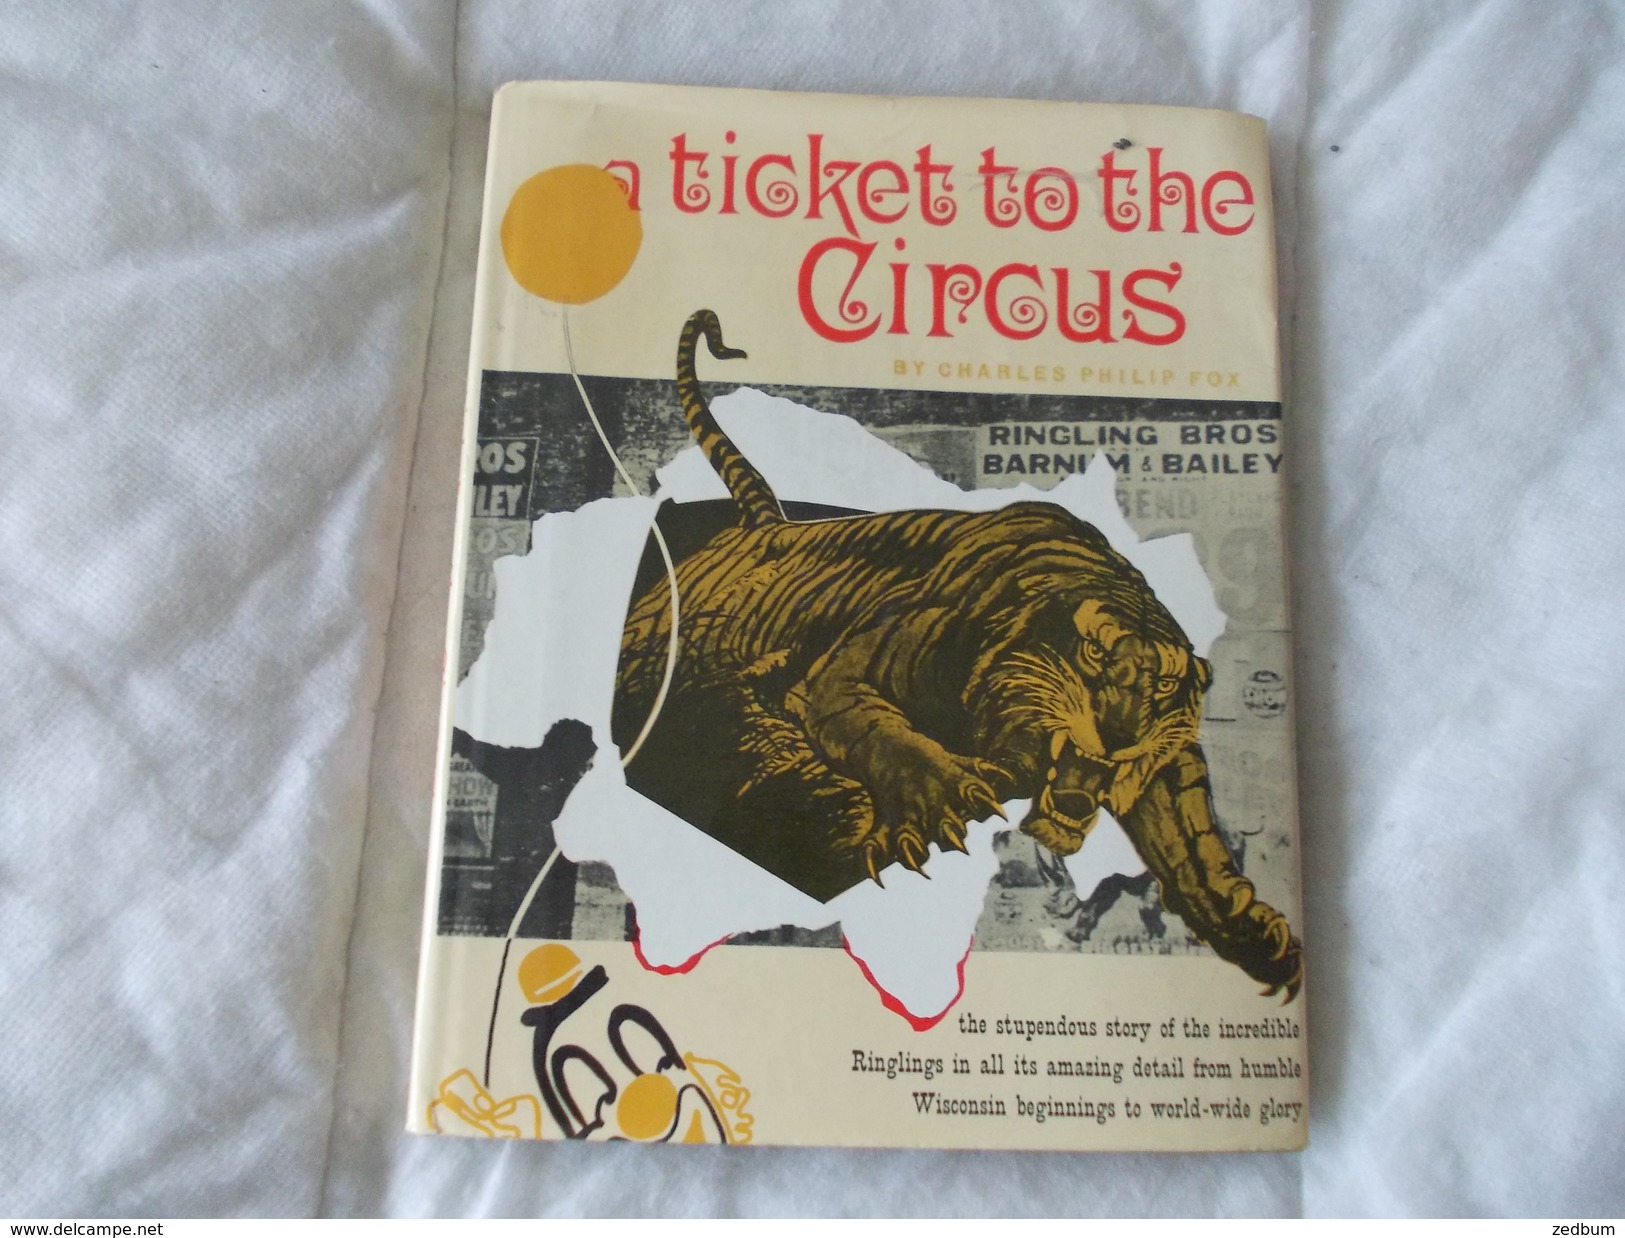 A Ticket To The Circus By Charles Philip Fox - Other & Unclassified